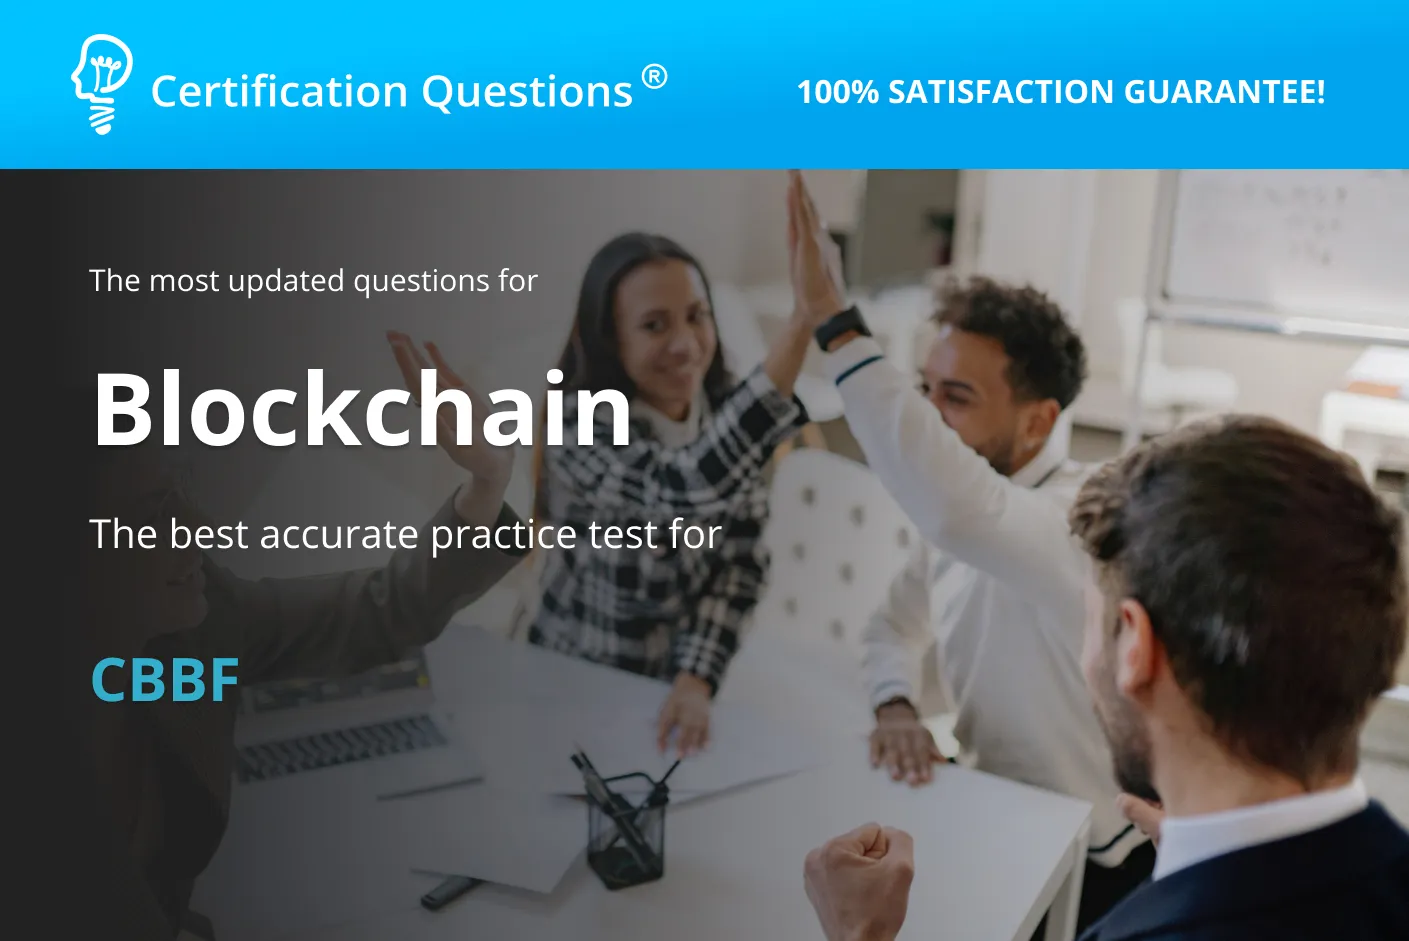 This is image is a guide about Blockchain CBBF exam